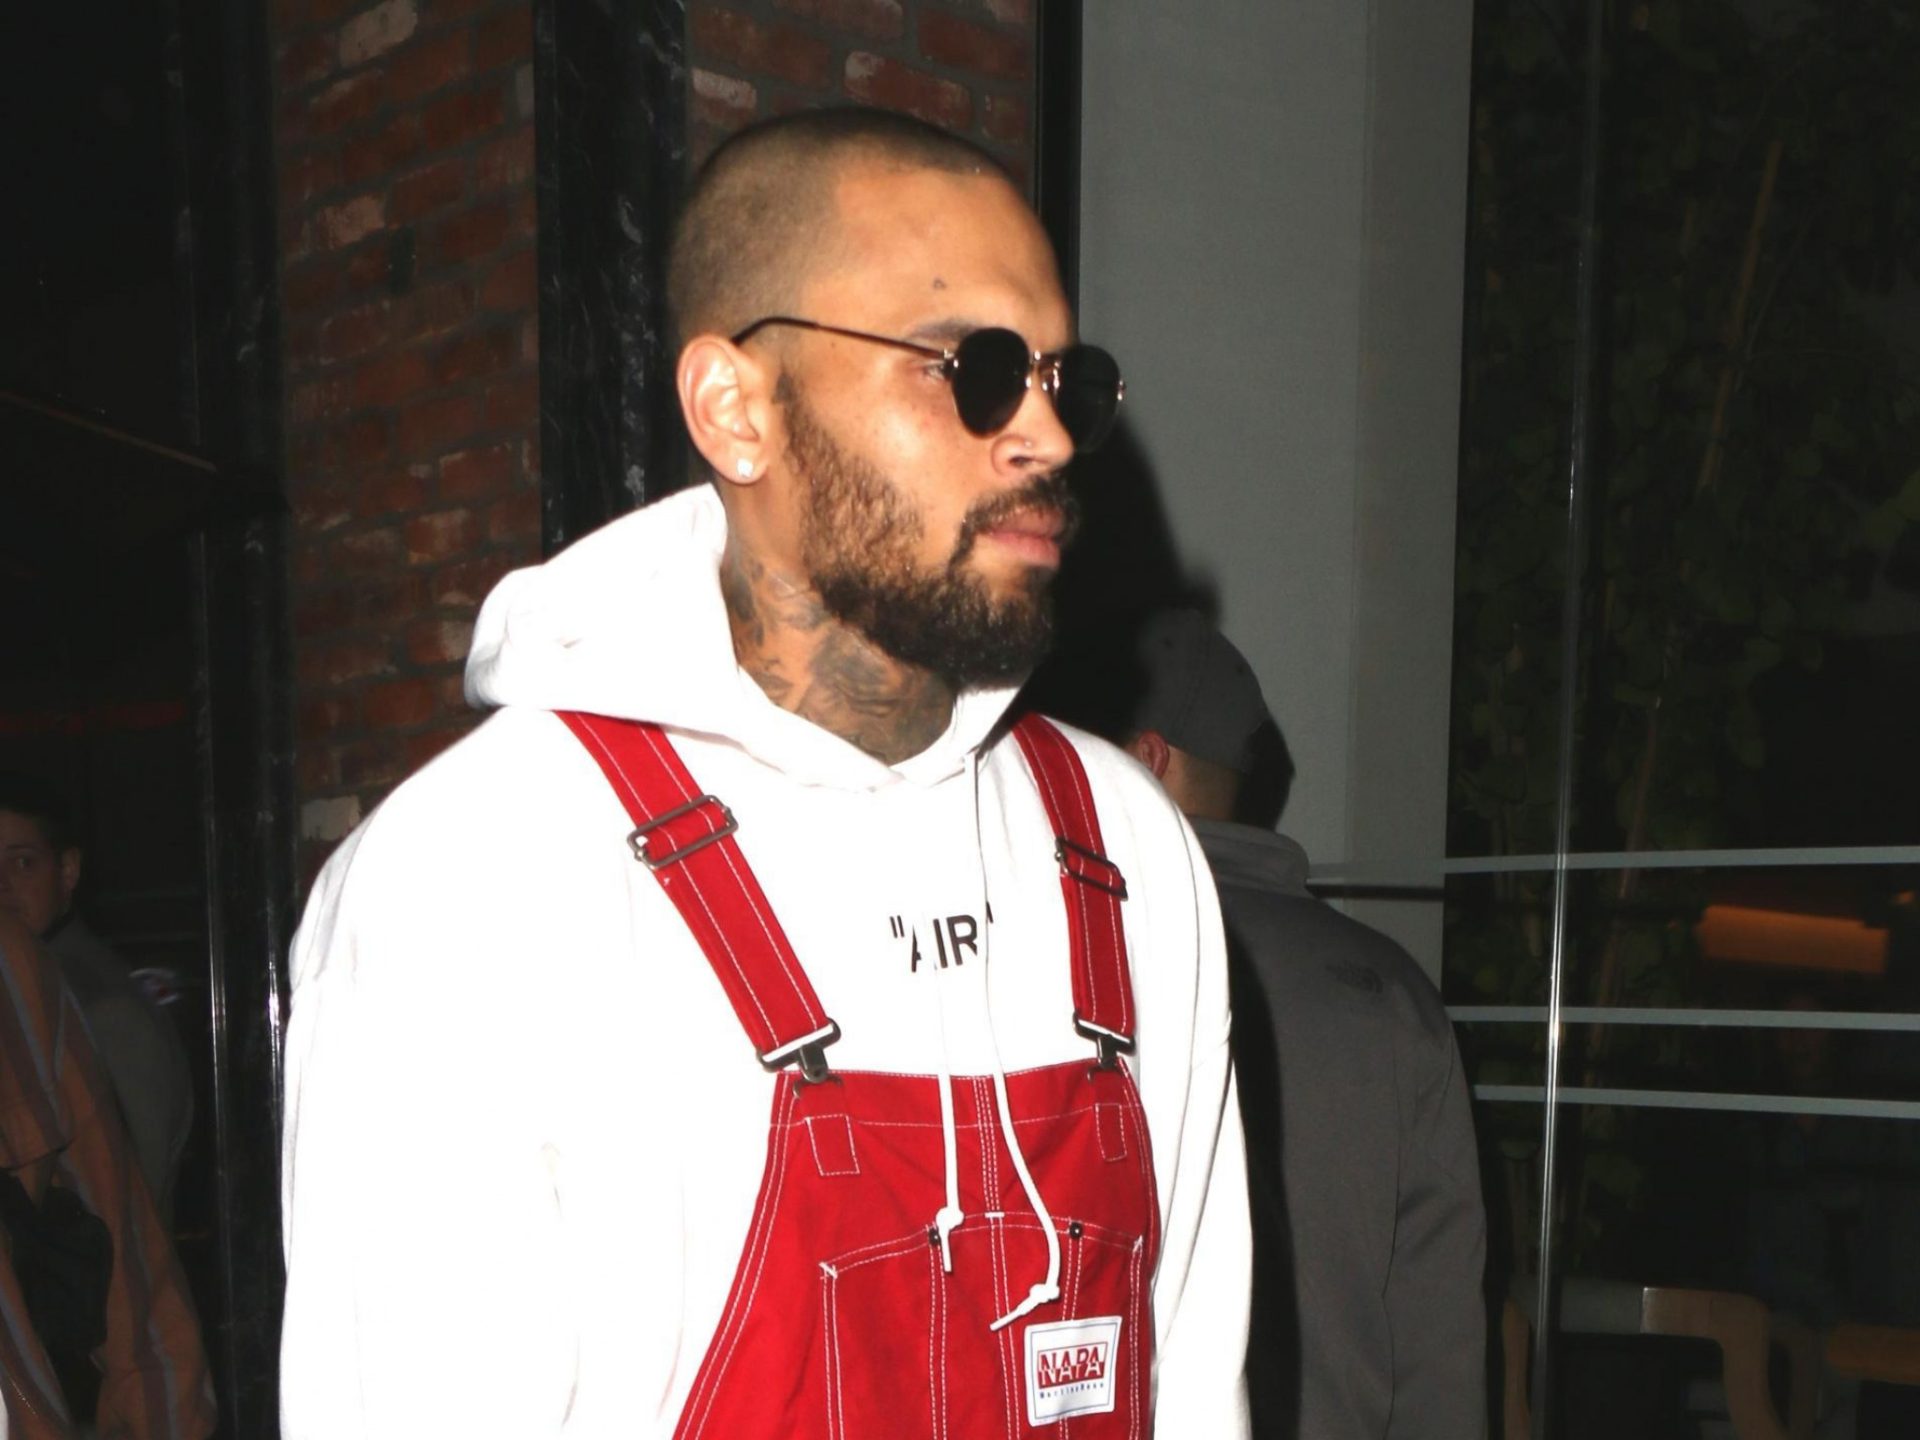 Chris Brown faces possible arrest if he returns to this area